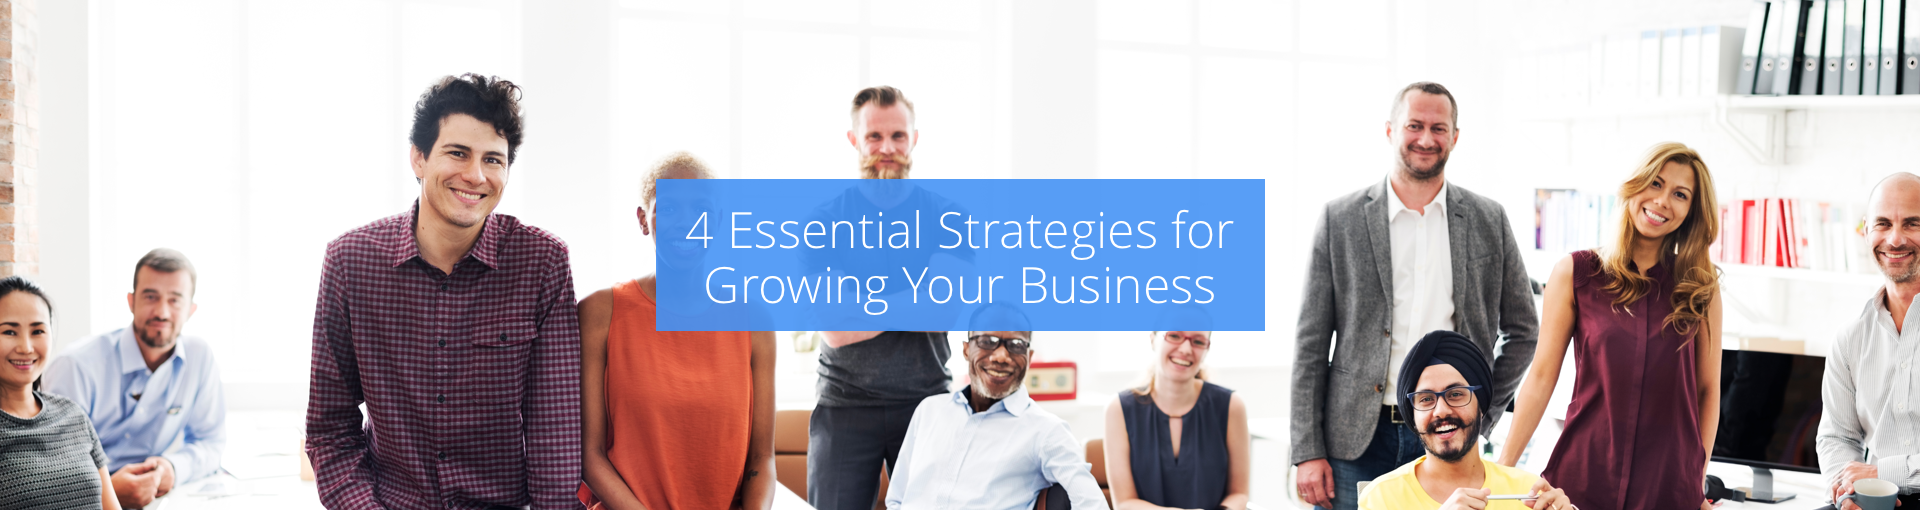 4 Essential Strategies for Growing Your Business Featured Image